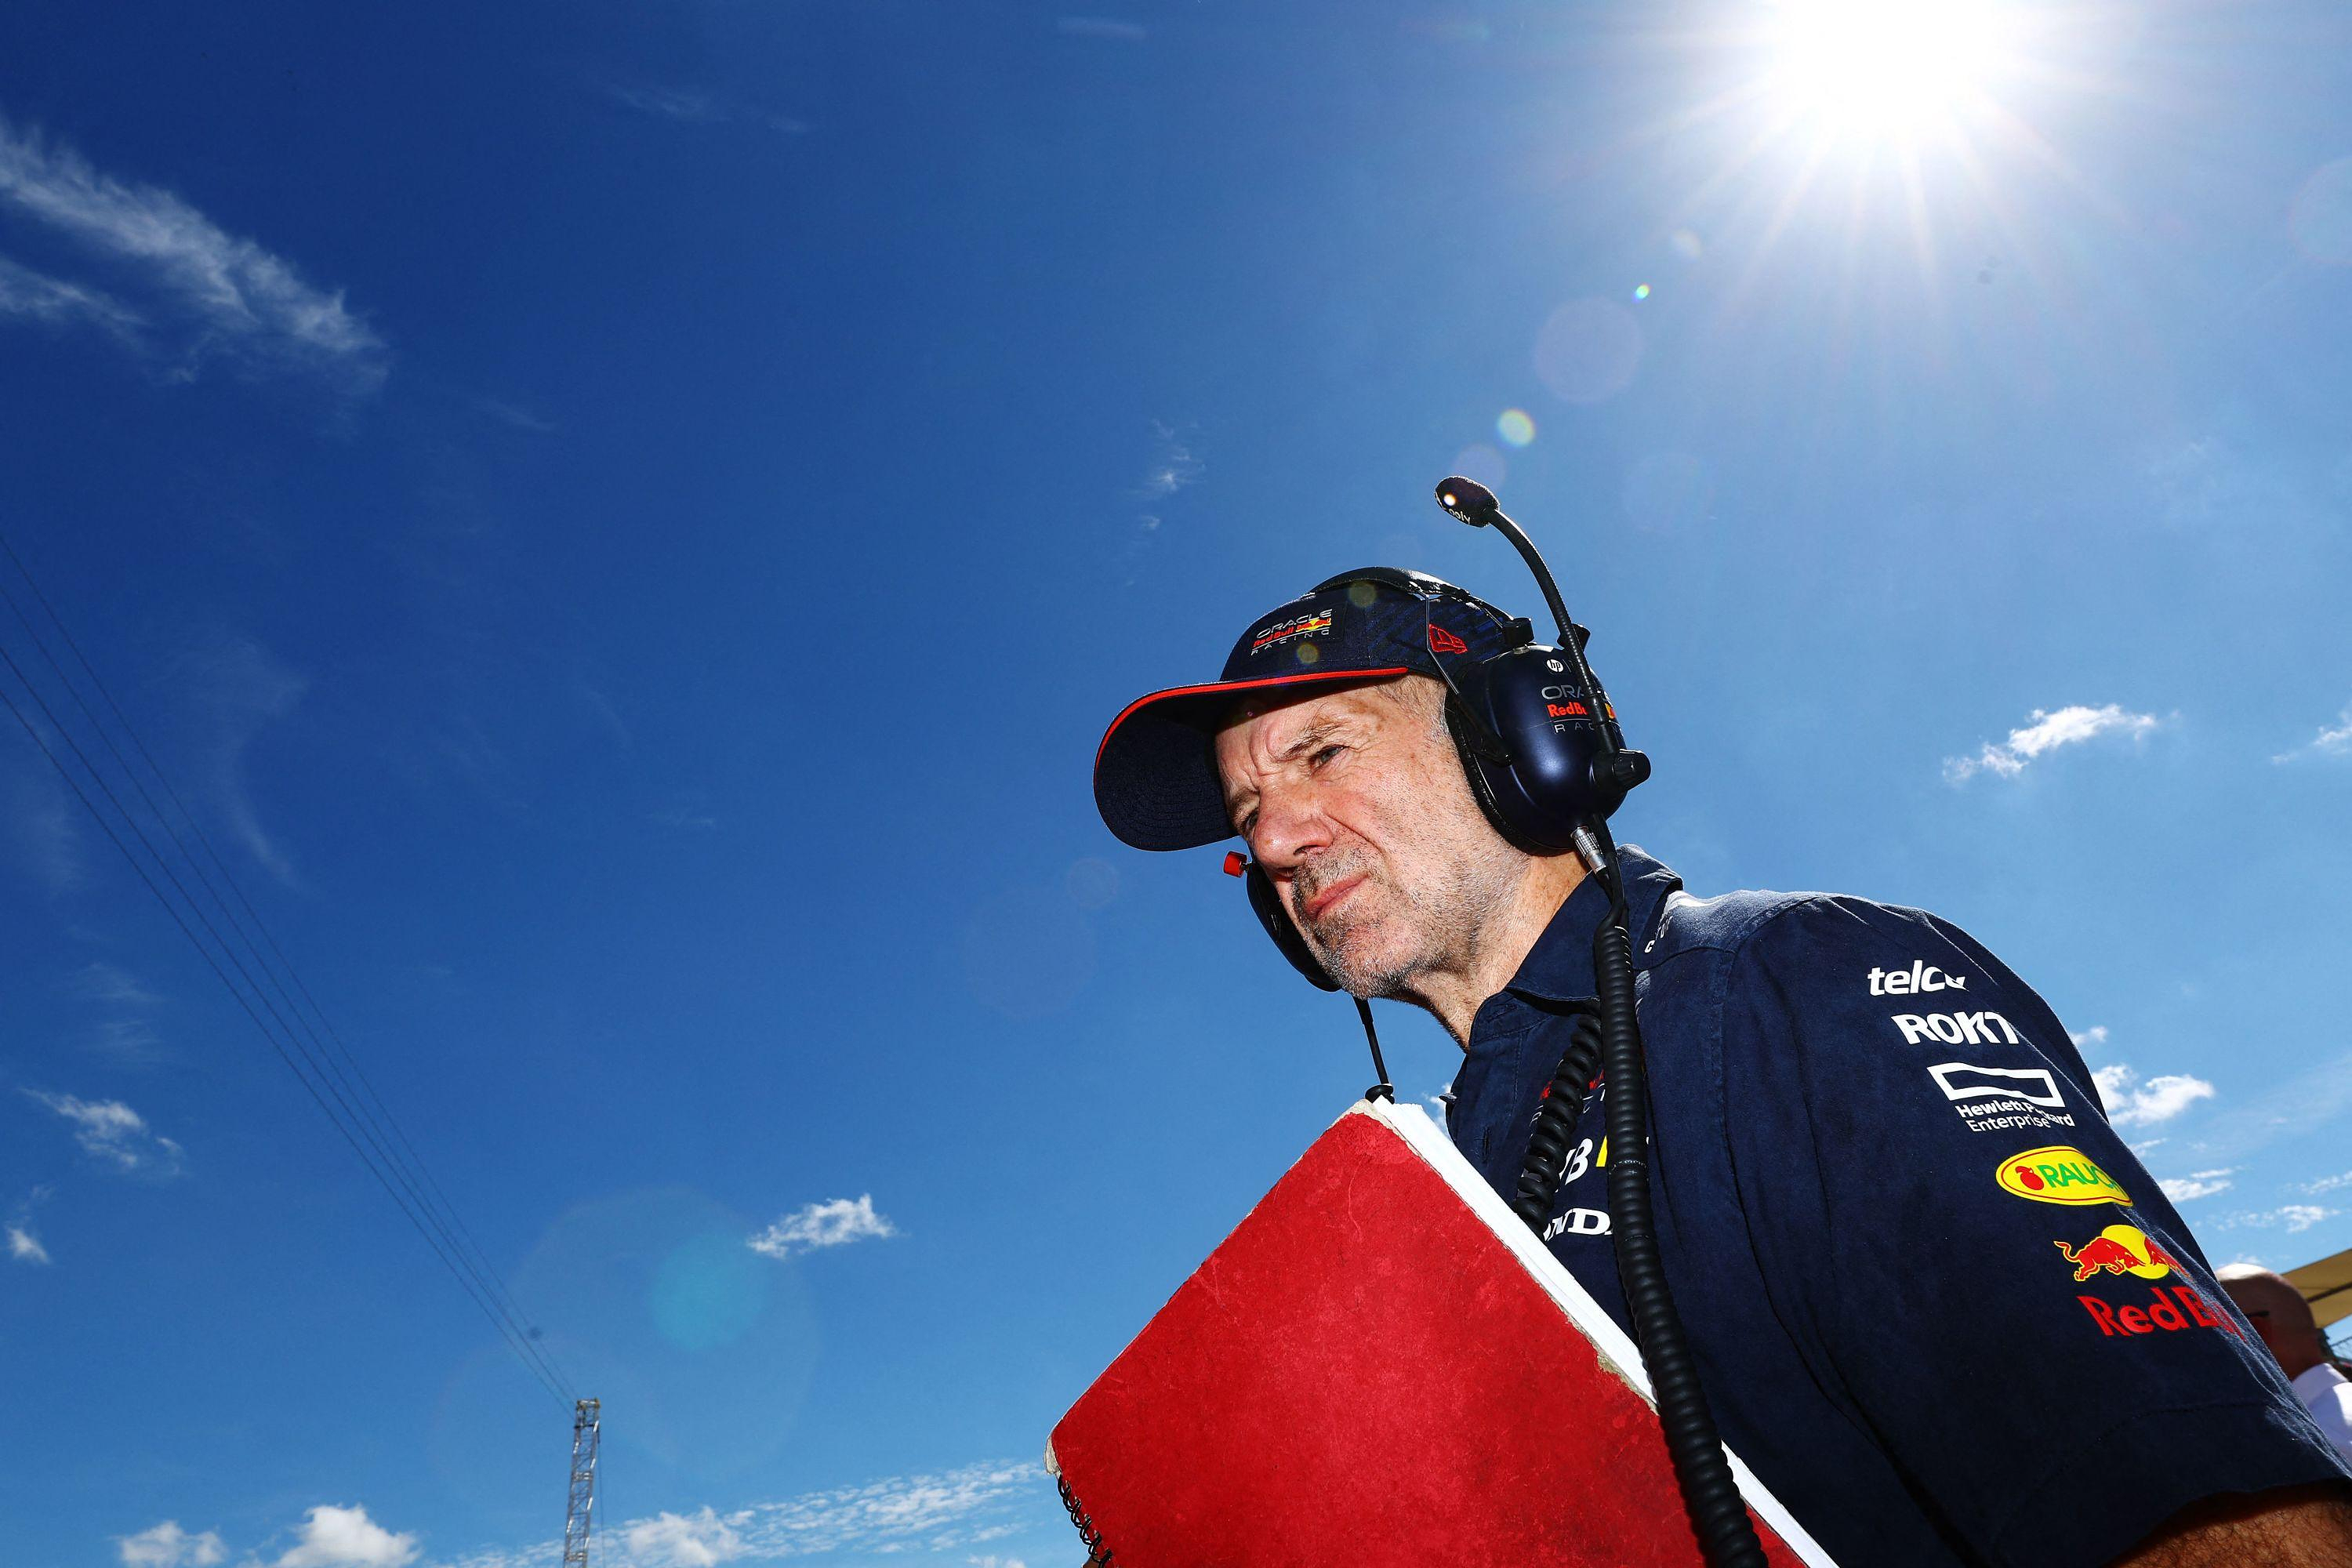 Formula 1: Newey's arrival would be “incredible” according to Hamilton and Leclerc